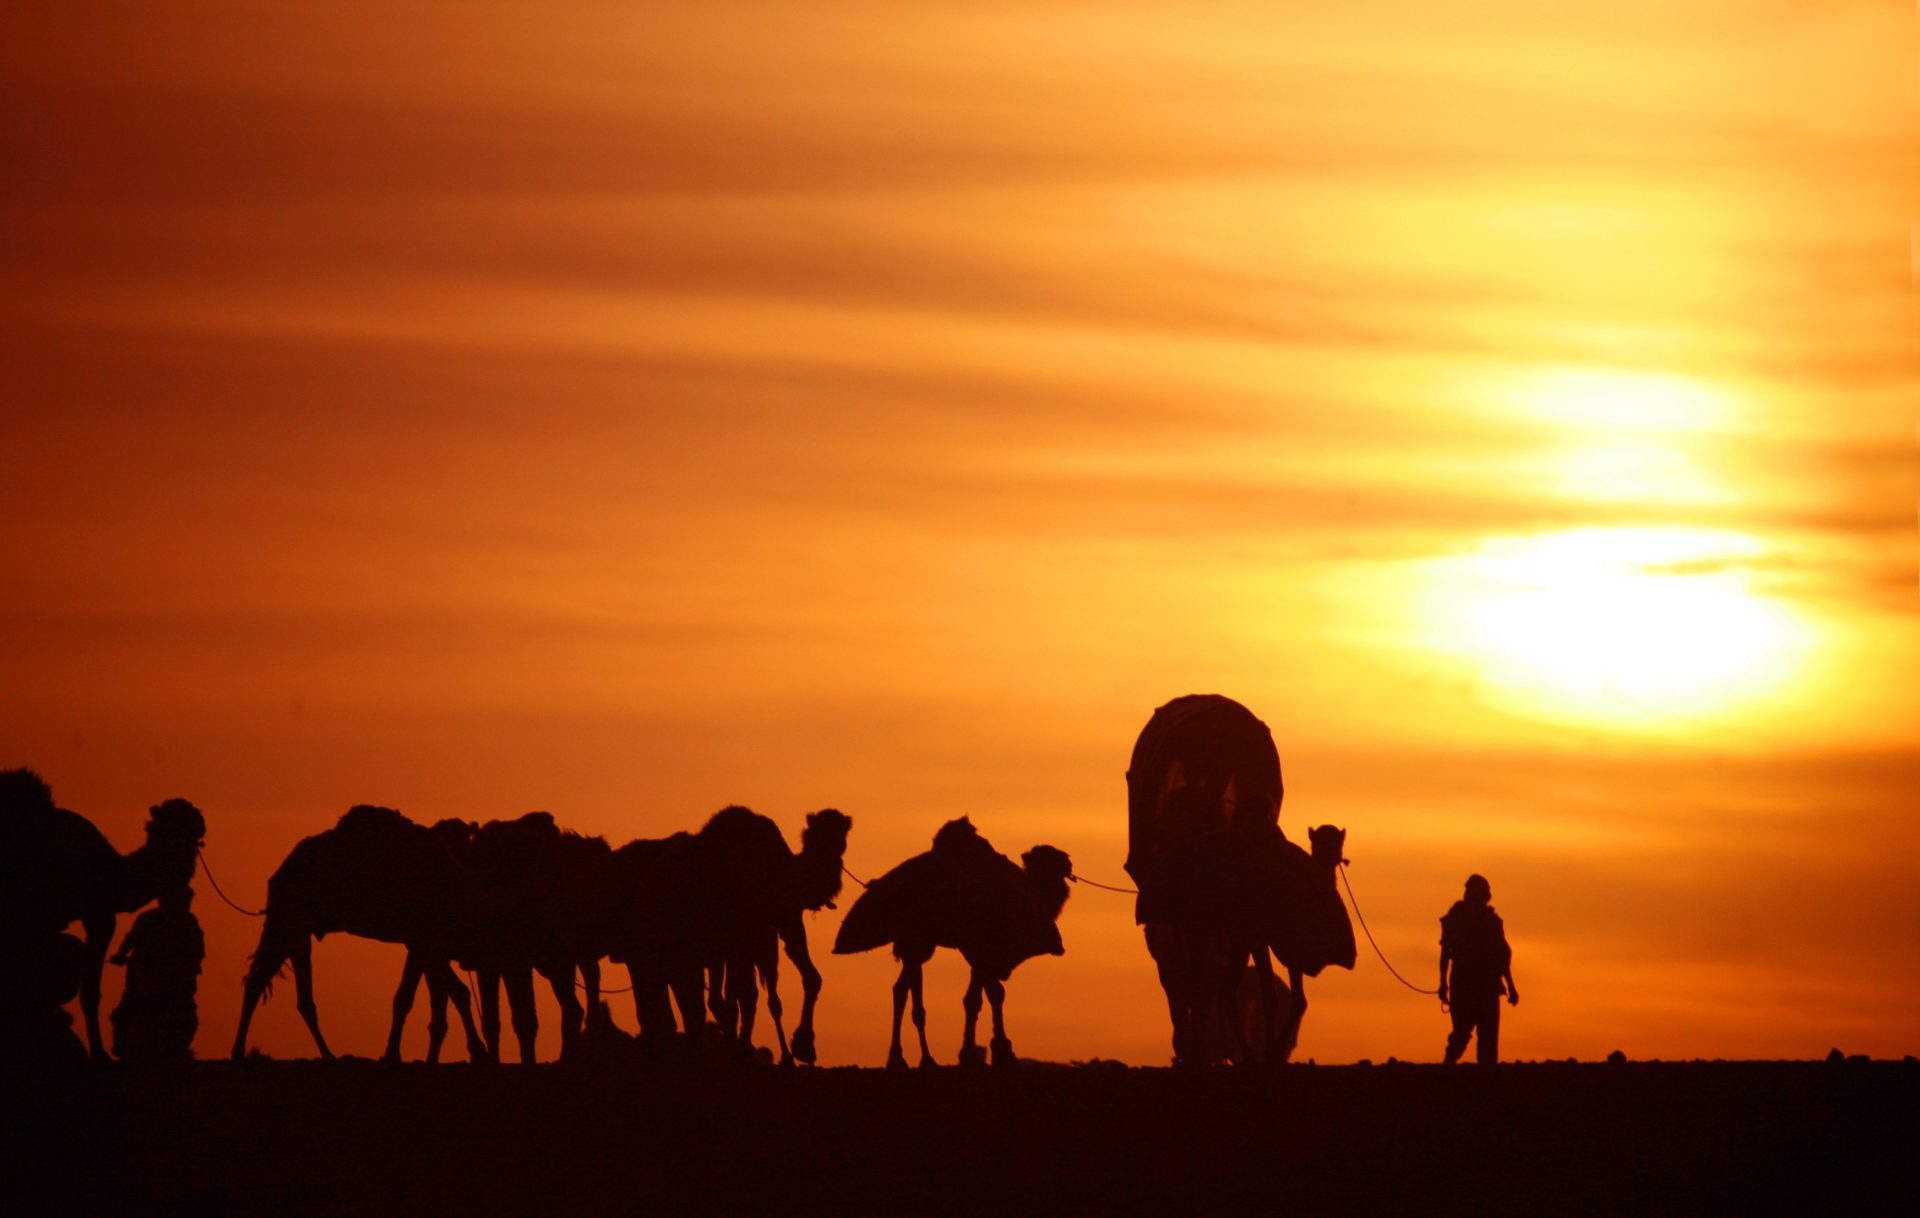 Caravan at sunset from Journey to Mecca, SK Films